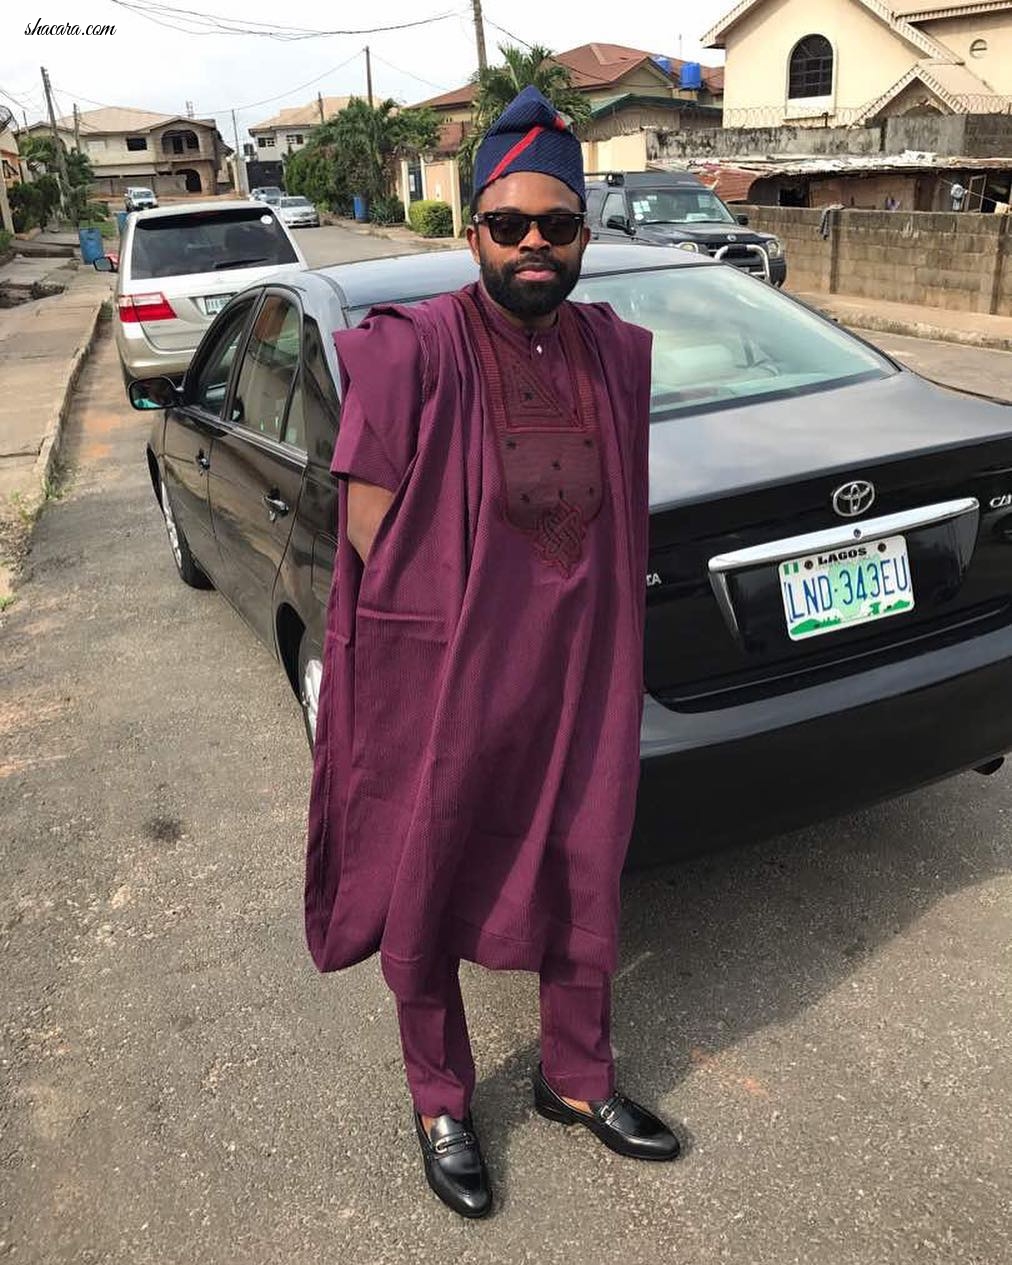 Demons Or Angels? Check Out The Hot Men At Banky W & Adesua Etomi’s Traditional Wedding